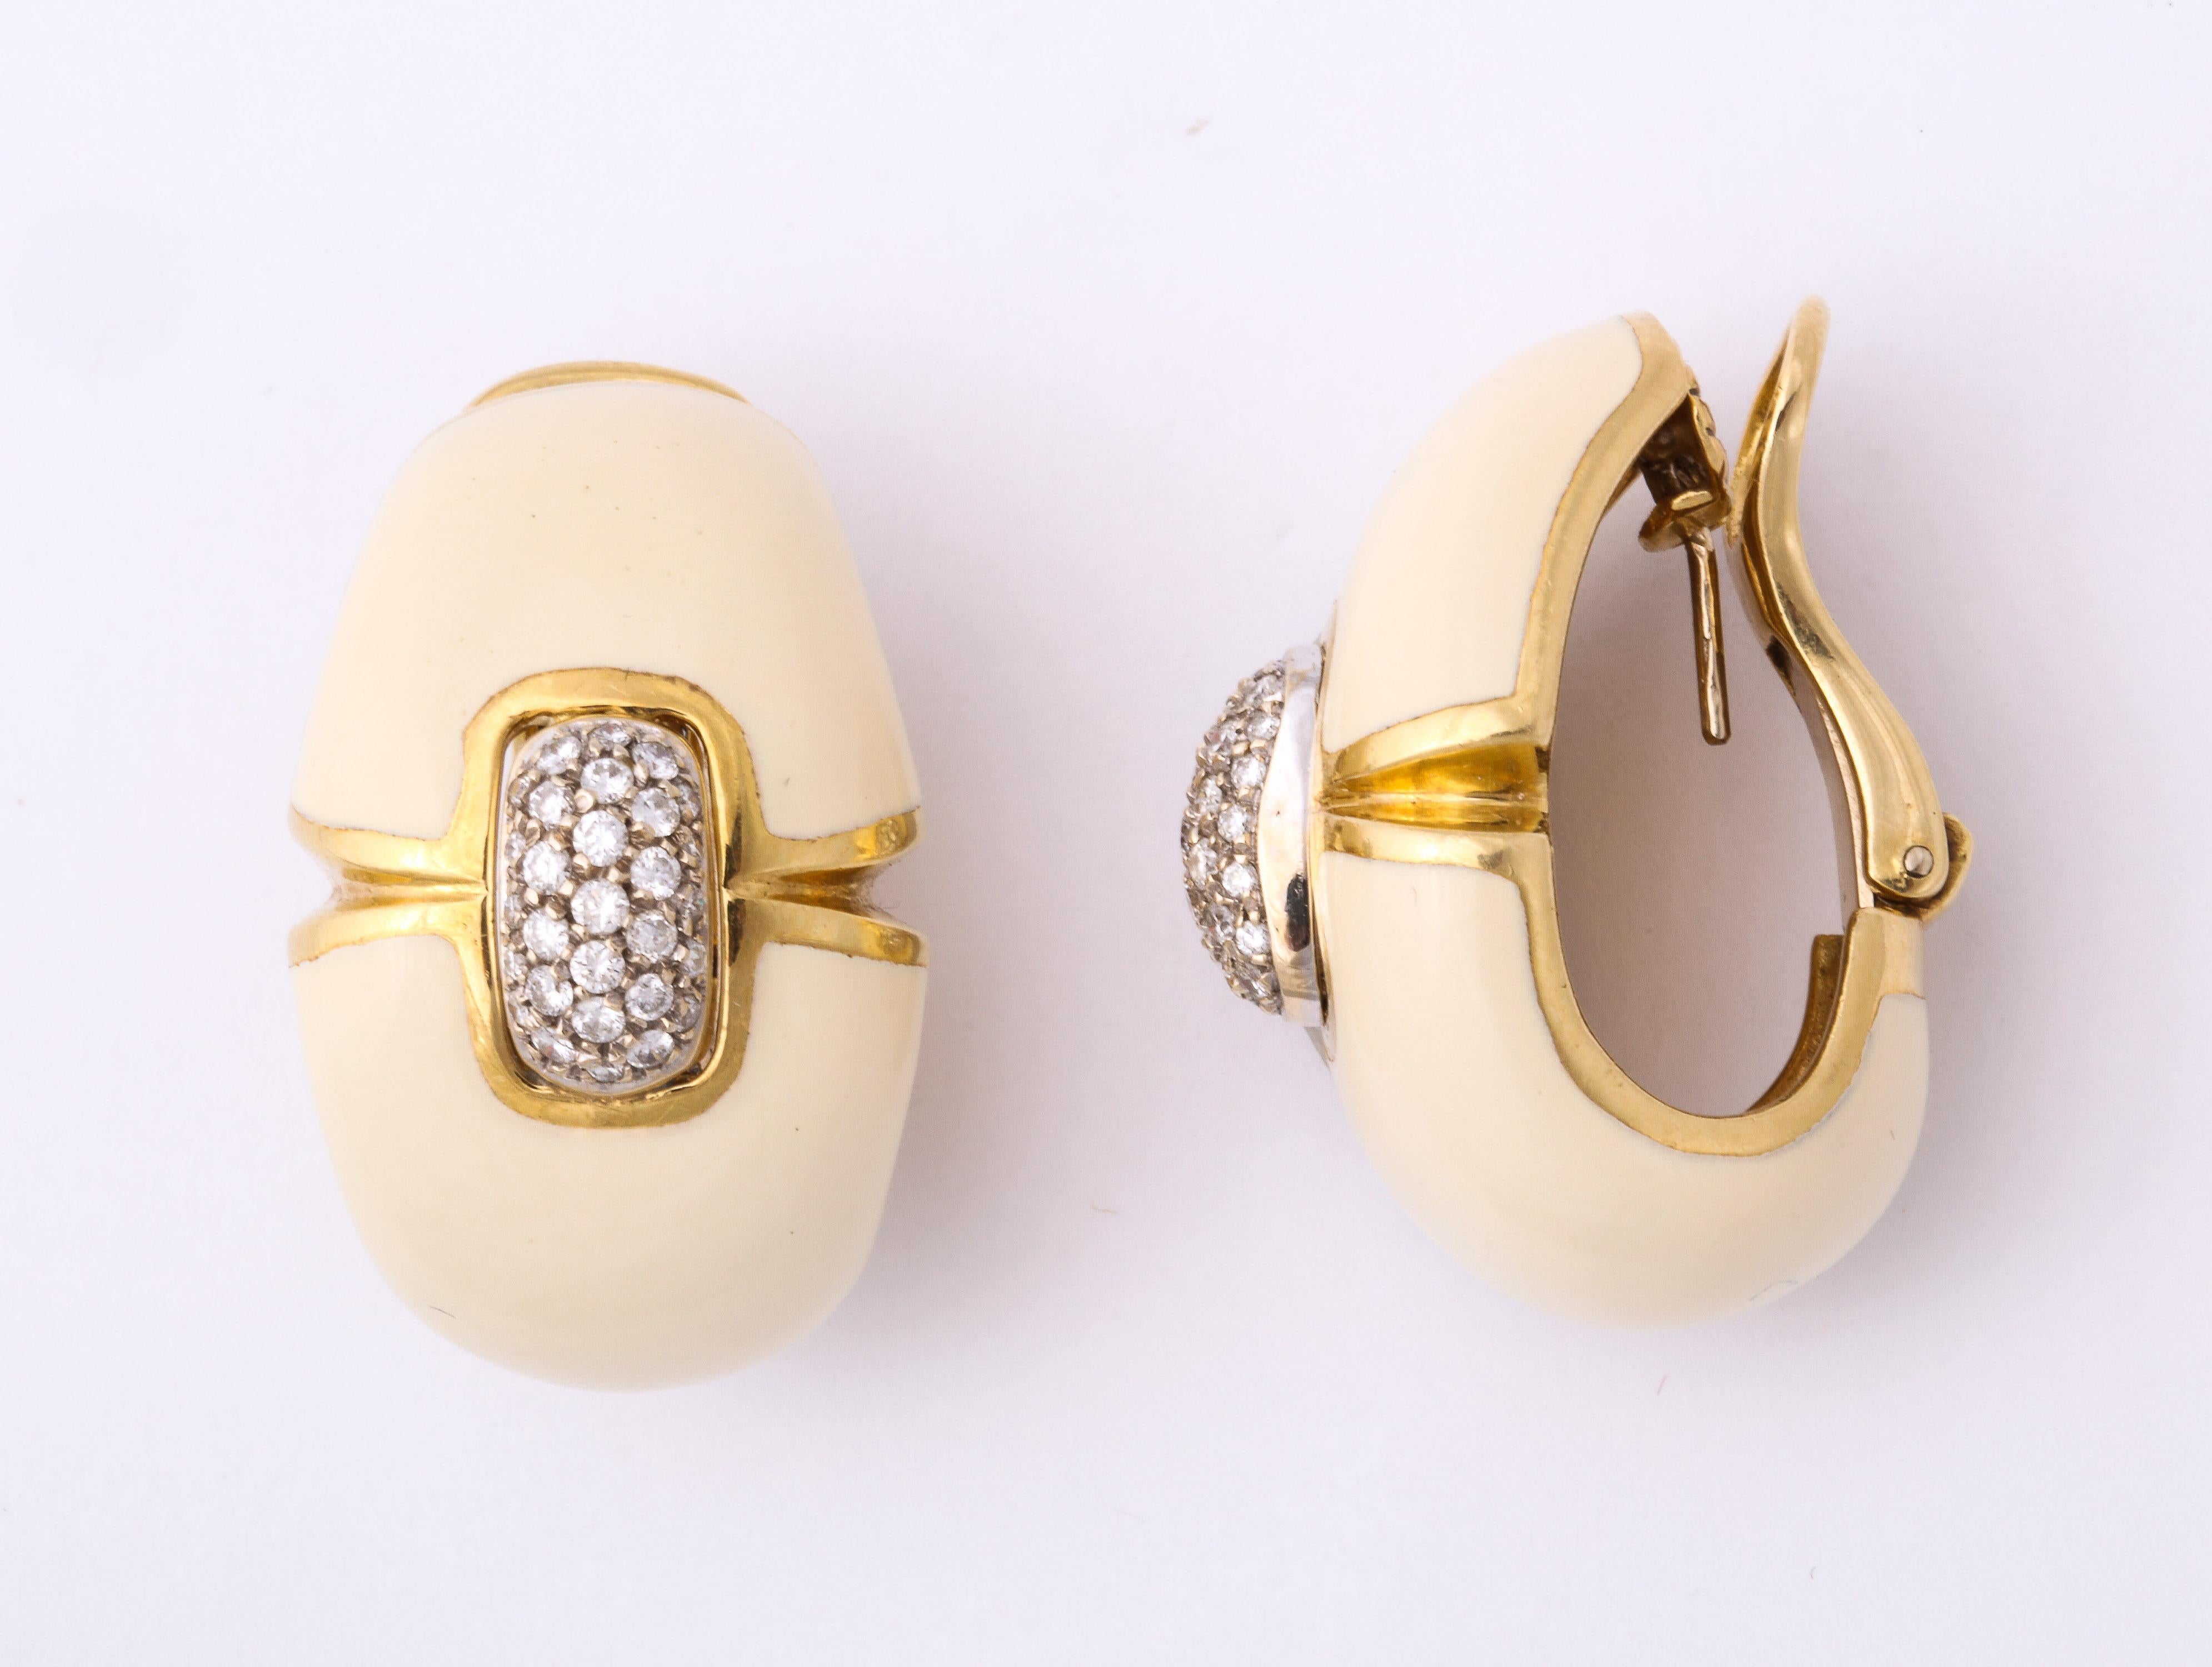 One Pair Of Ladies 18kt High Polish Yellow Gold Earrings Decorated With Ivory Color Enamel And Embellished With Numerous Full Cut Diamonds Weighing Approximately 2 Carats Total Approx Weight.Designed With Very Fancy And Expensive Clip On Closures.,